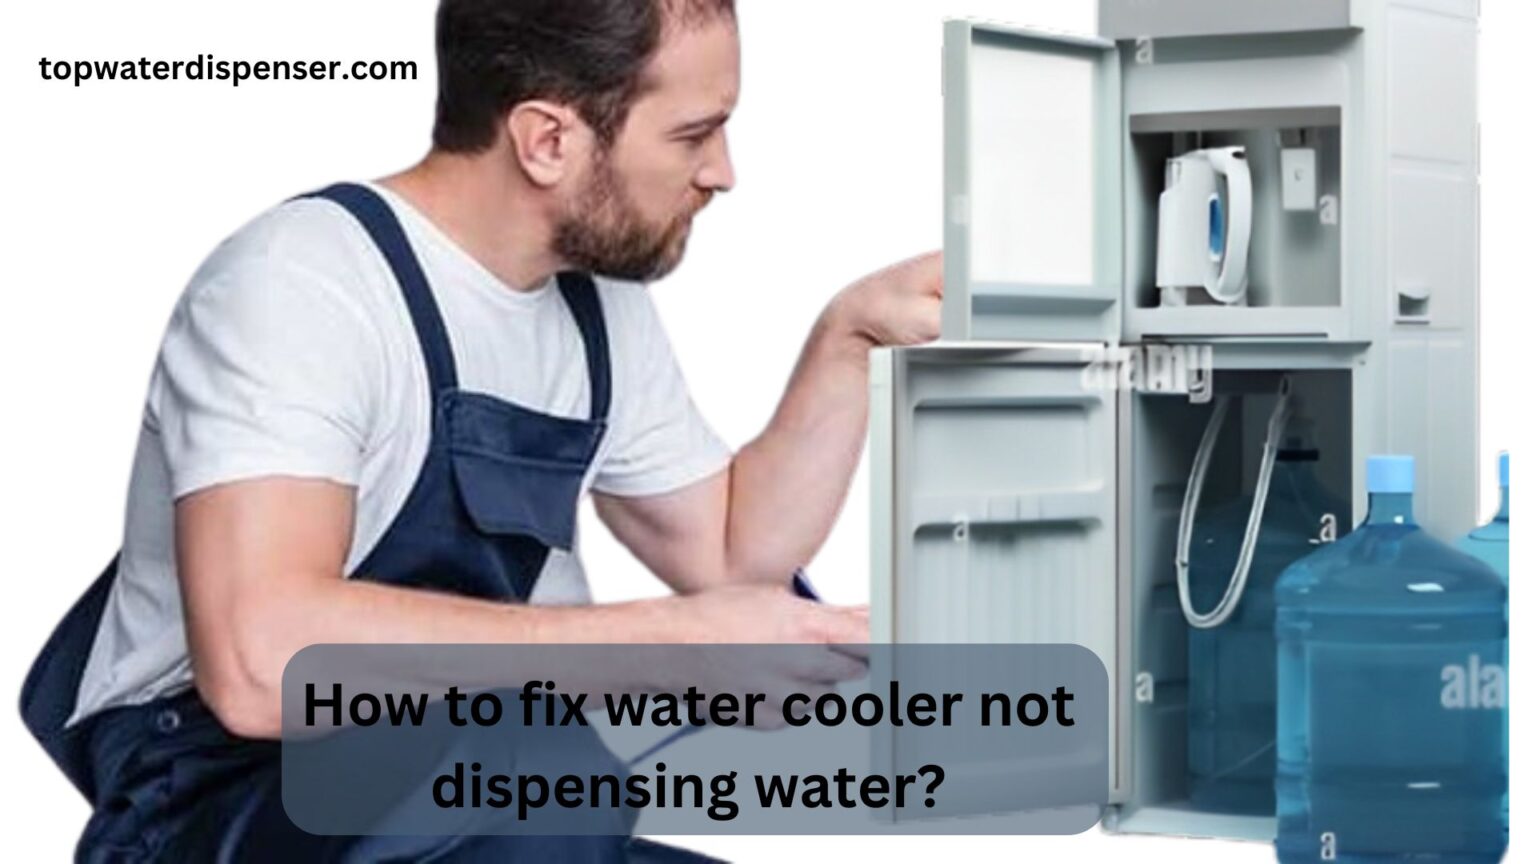 How to fix water dispenser?